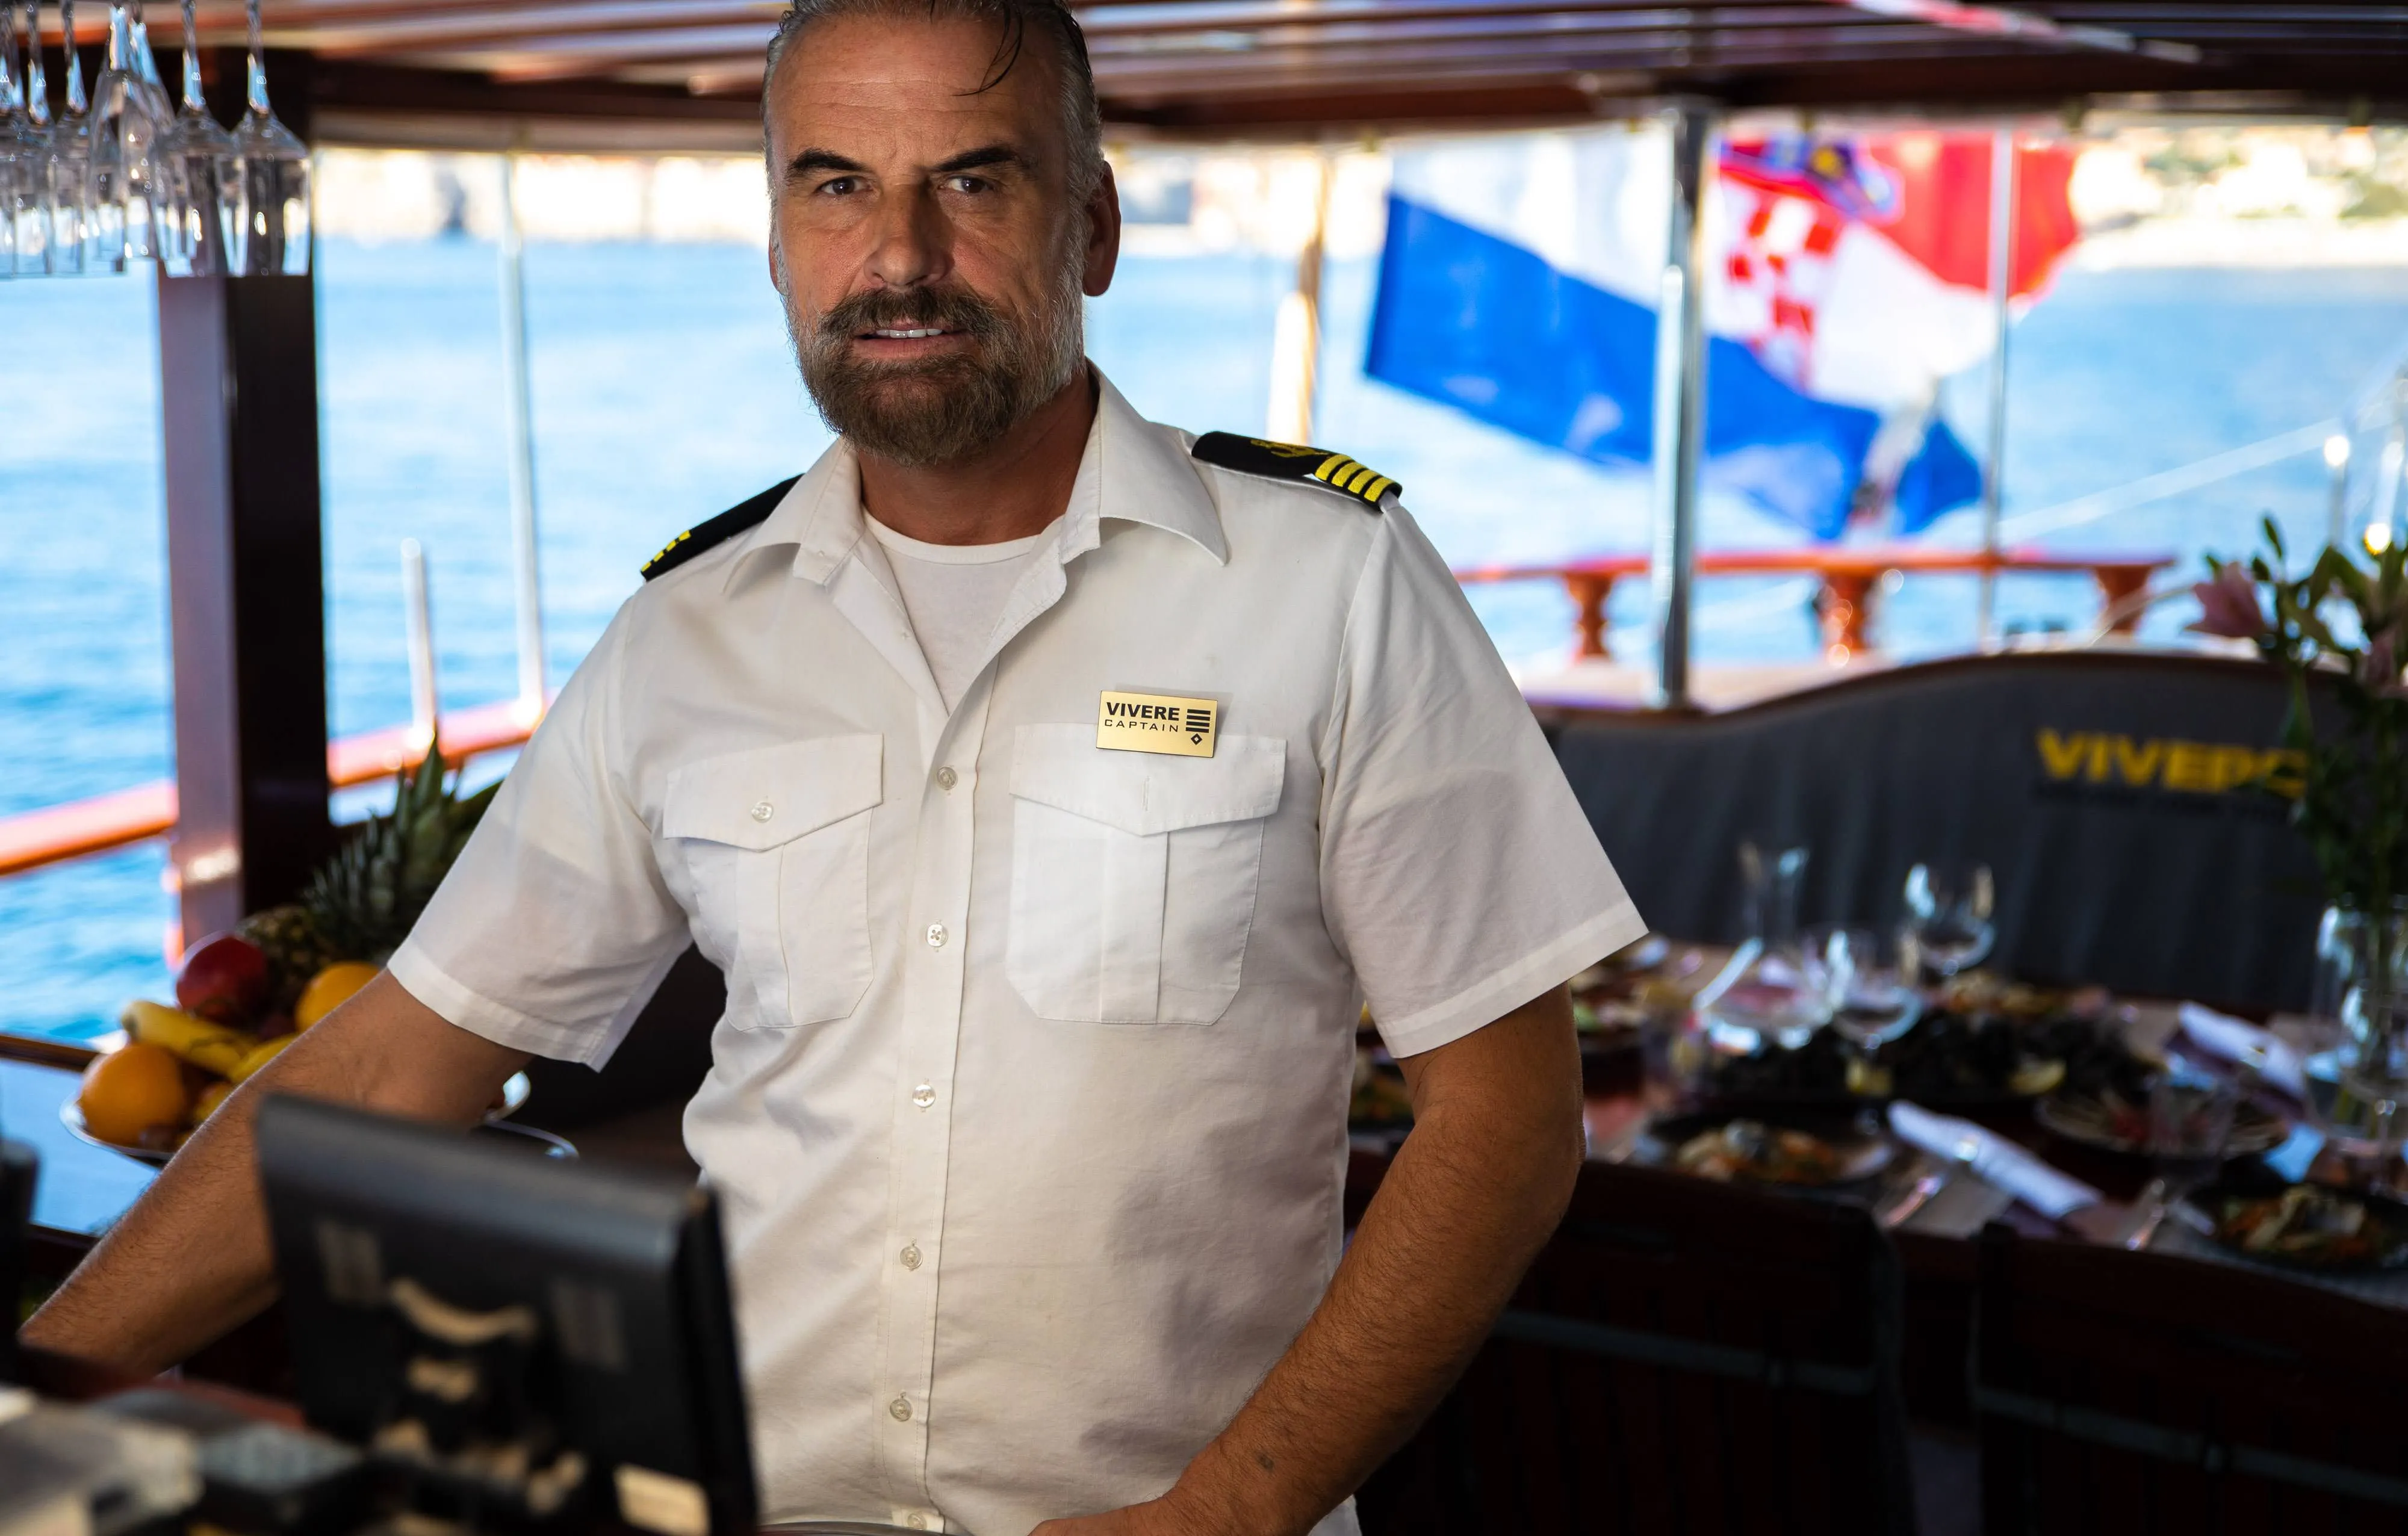 An Insightful Interview with Miljenko Lovrić, Owner and Captain of Yacht Vivere